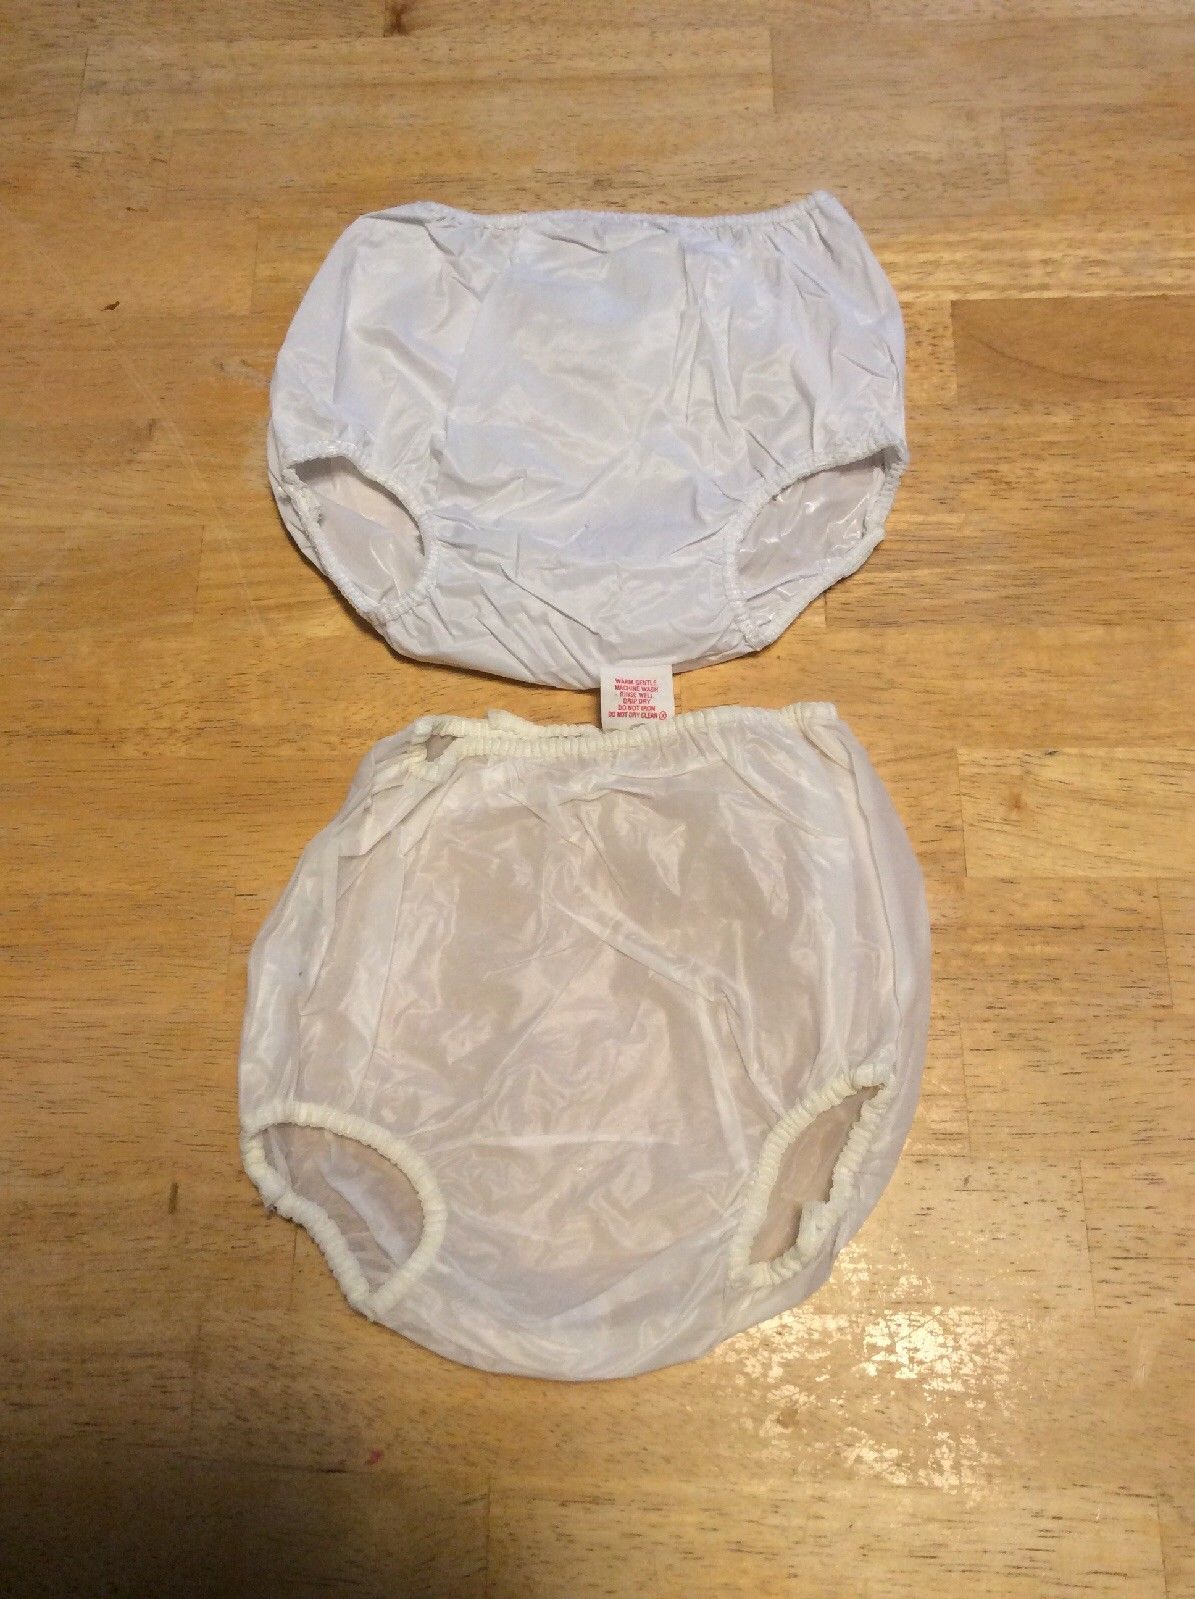 Adult diaper and rubber pants